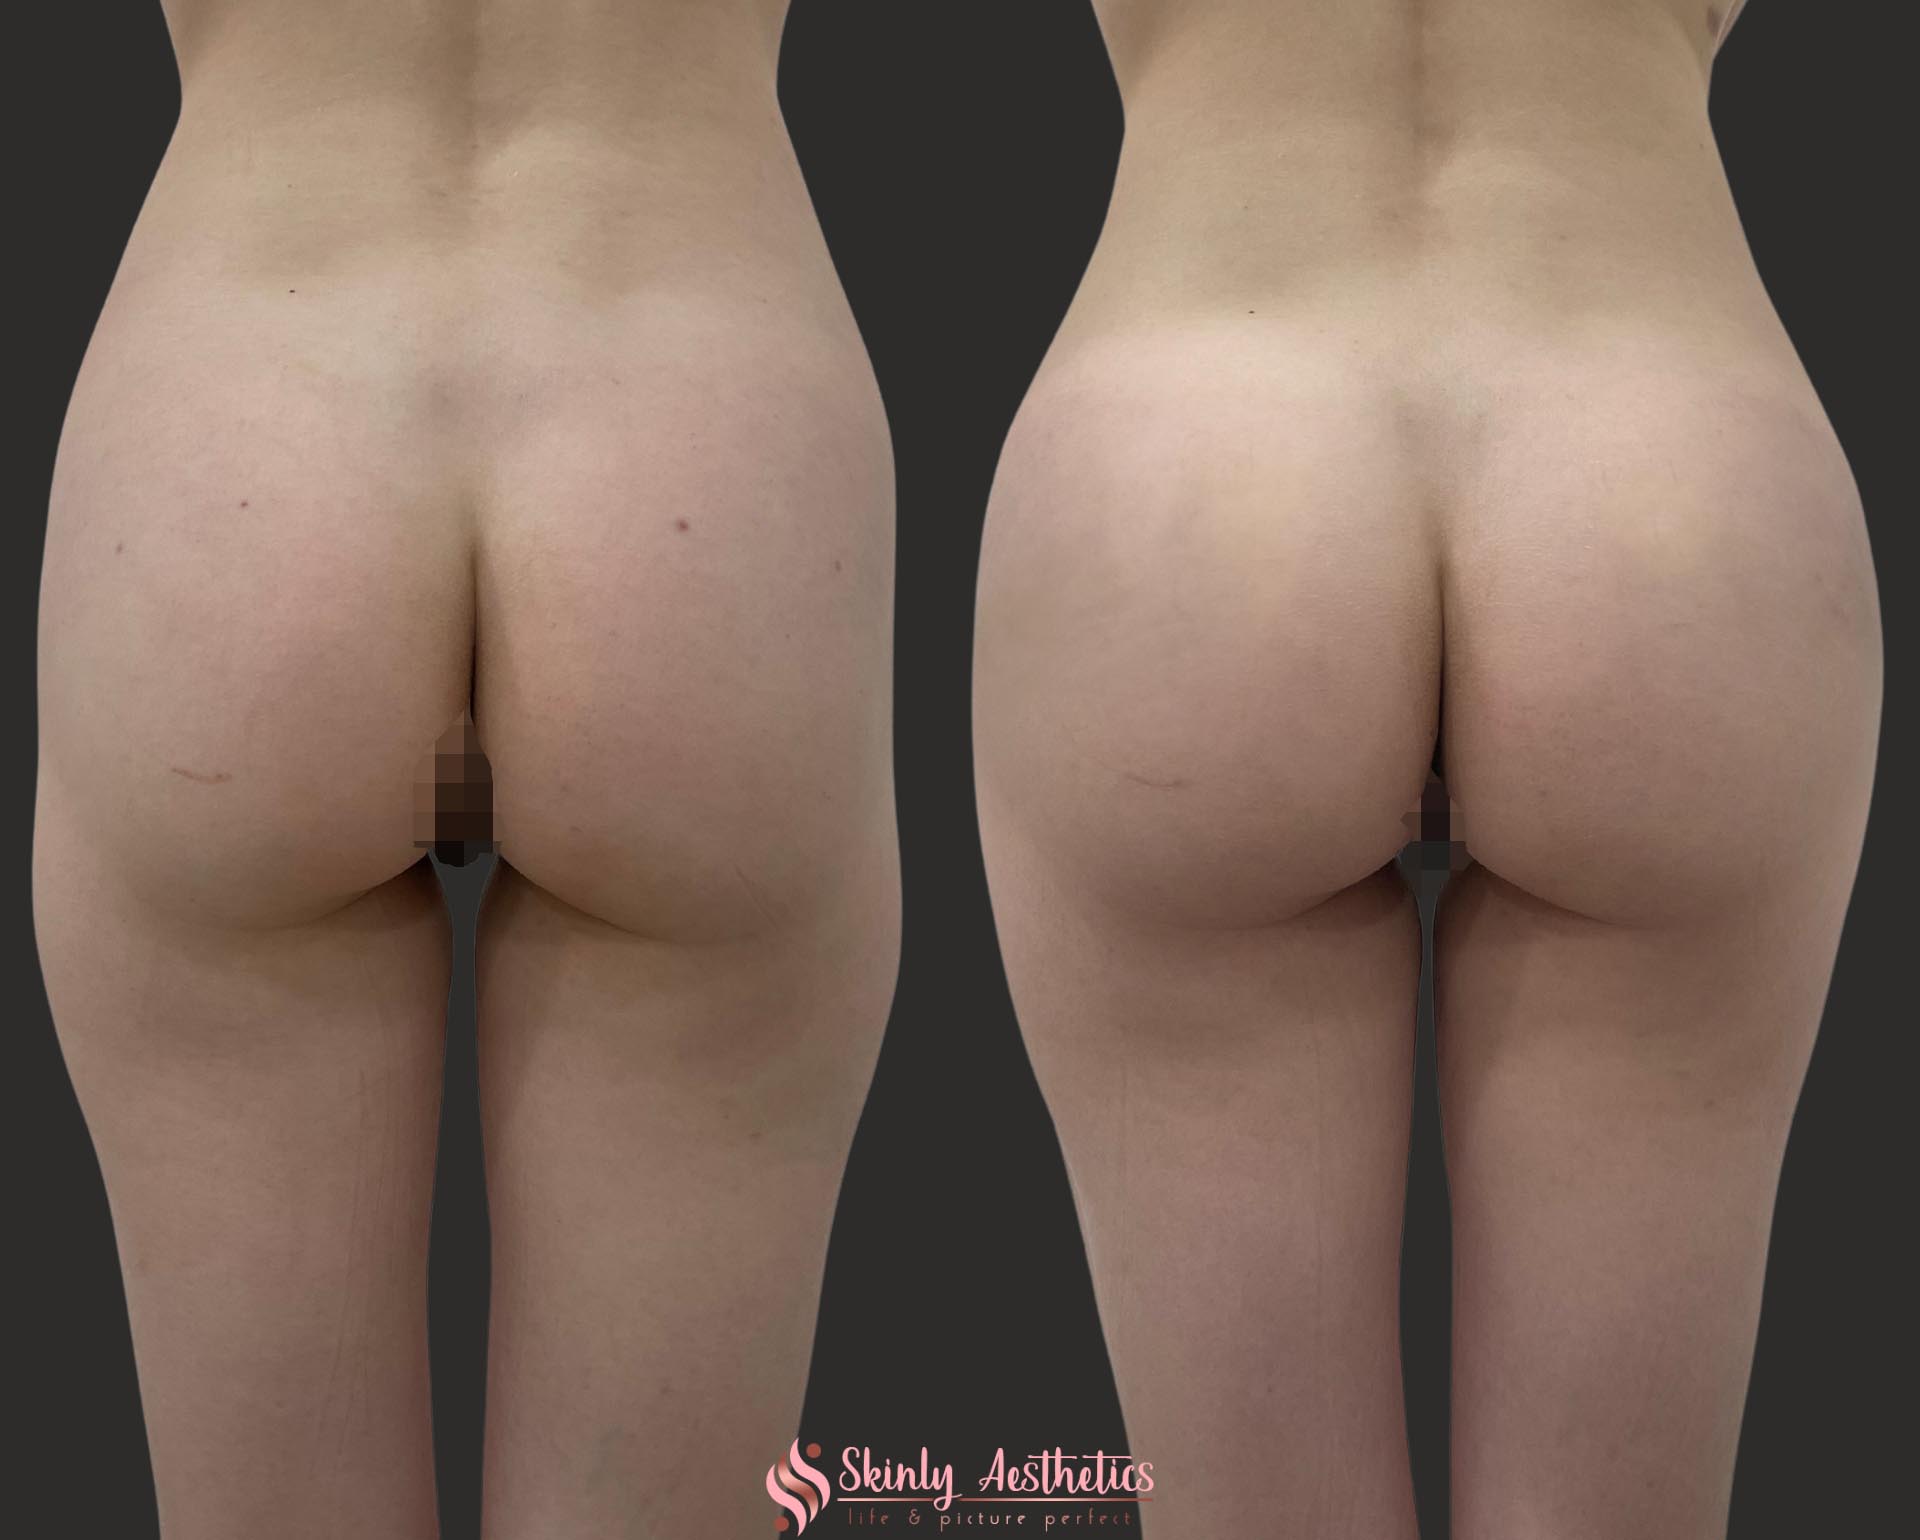 before and after results demonstrating non-surgical butt lift with Sculptra and Radiesse fillers